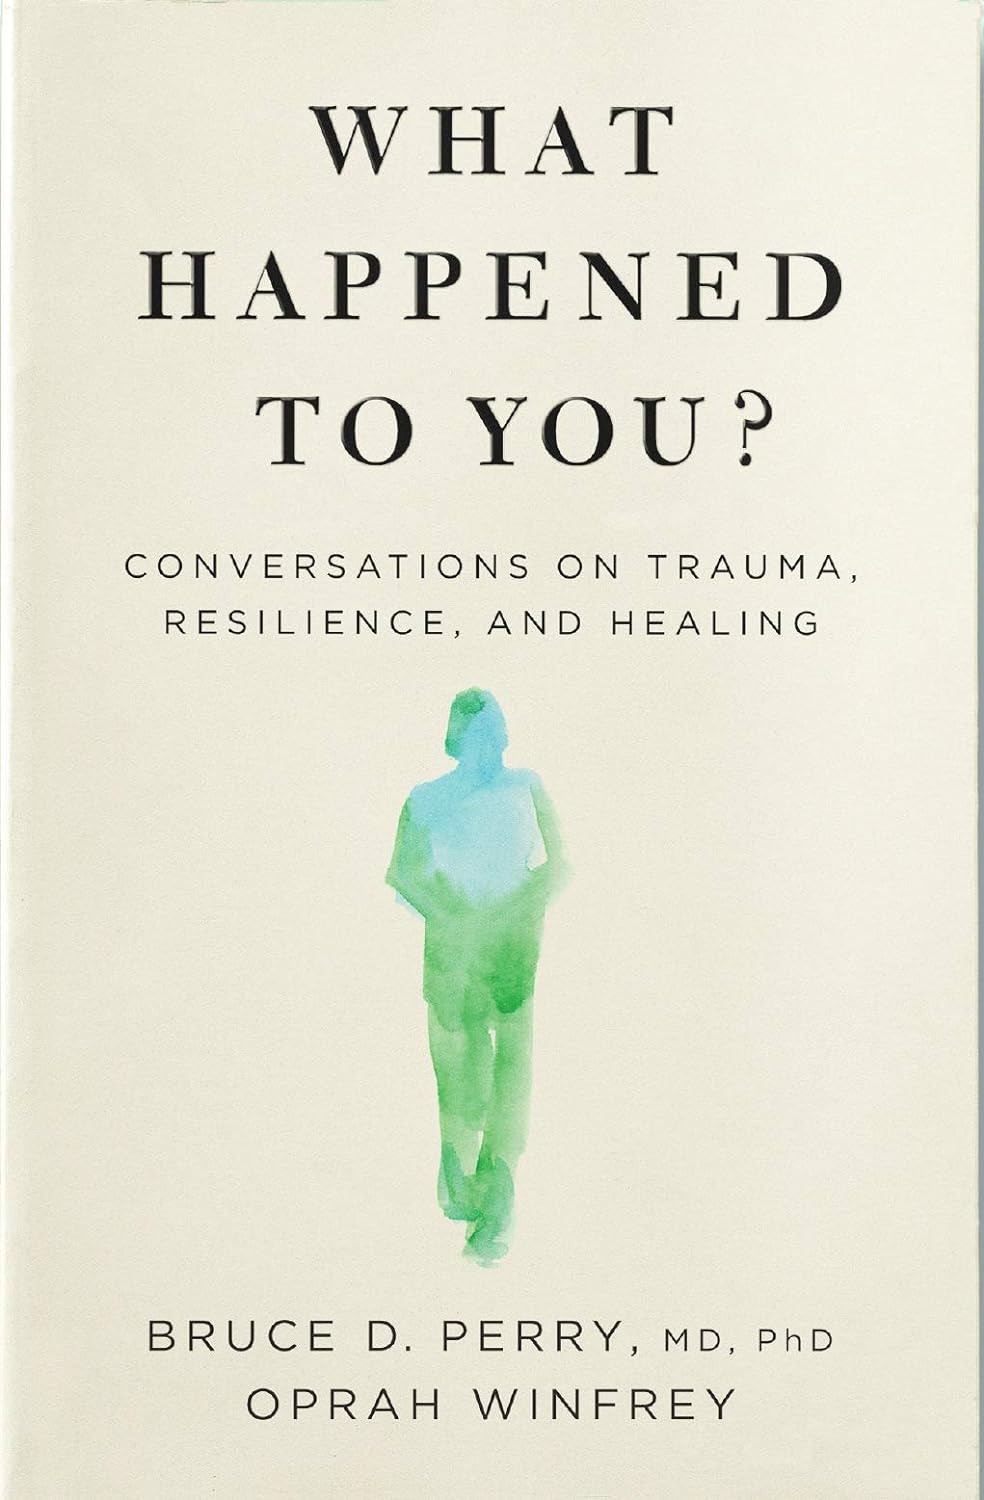 'What Happened to You' by Bruce D. Perry and Oprah Winfrey